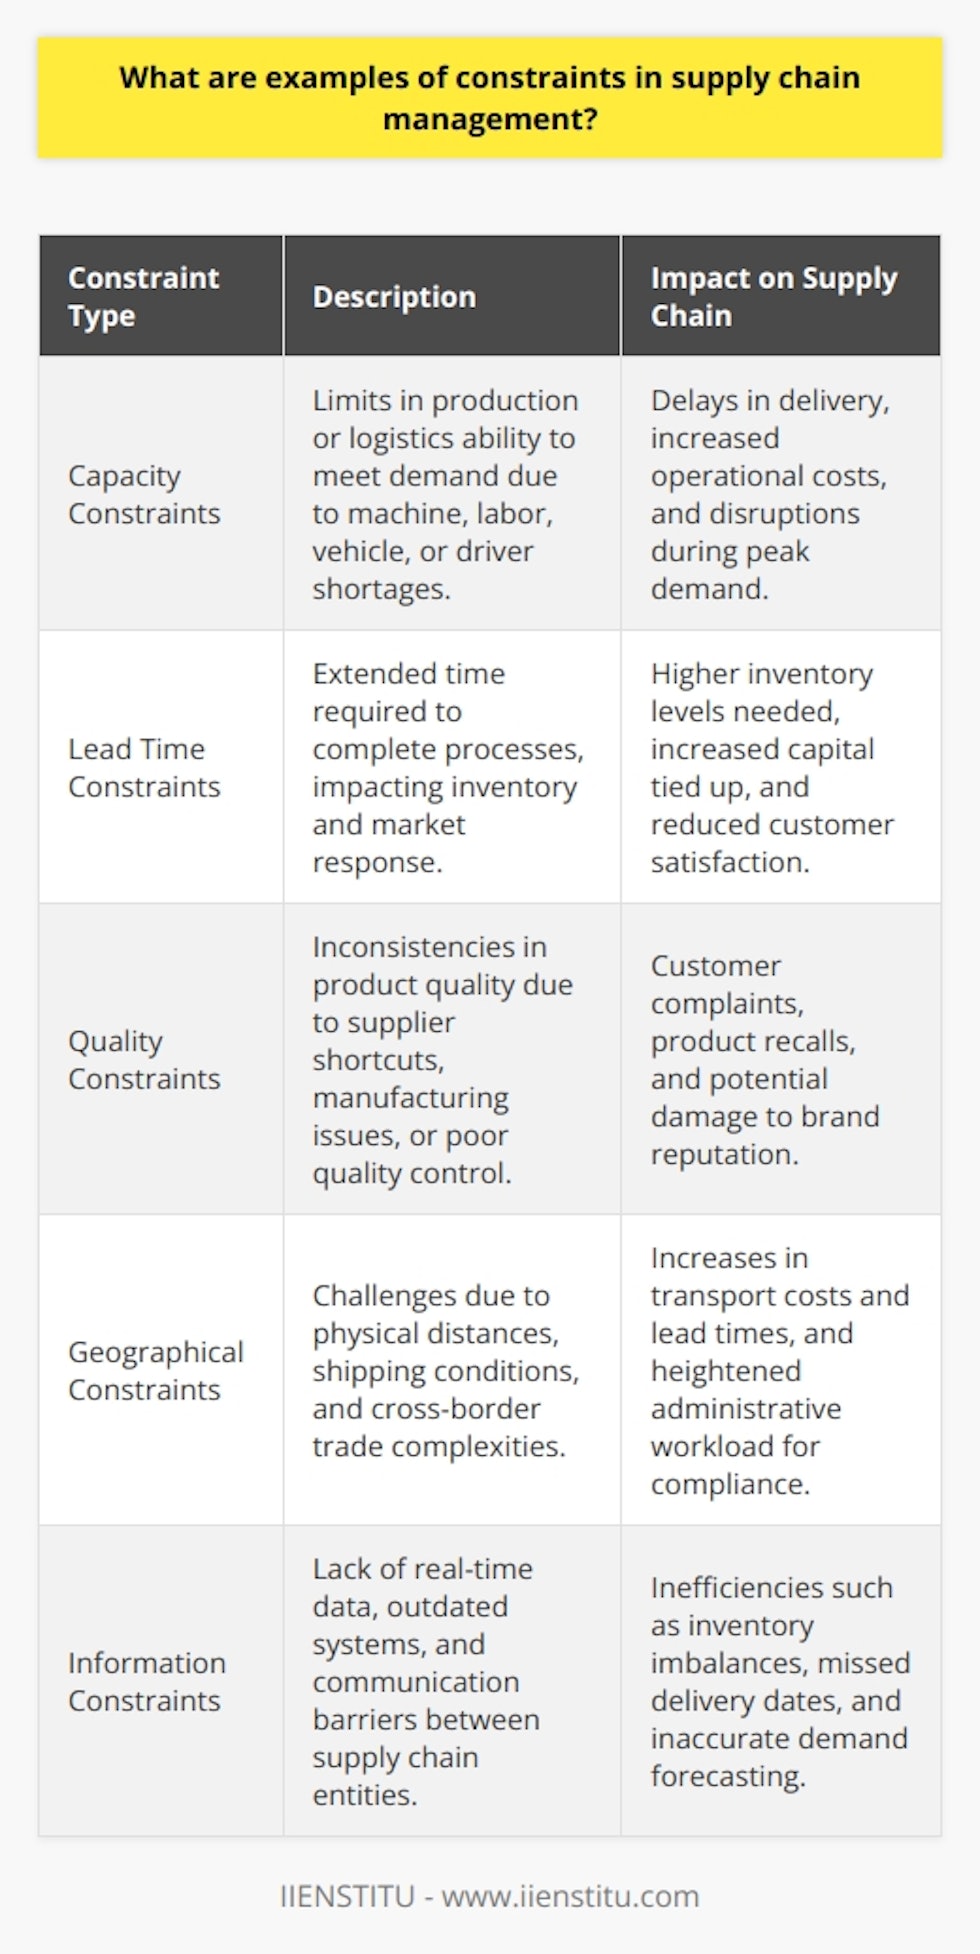 Supply chain management is a complex network of interconnected businesses that work together to provide products and services to consumers. However, this network often faces various constraints that can impede its efficiency and performance. It is important to understand and mitigate these constraints to ensure the smooth functioning of the supply chain. Below are several examples of constraints typically encountered in supply chain management.Capacity Constraints:Capacity constraints occur when a component of the supply chain lacks the ability to meet the demand. This can happen at any stage, including manufacturing, where machine or labor limitations can slow down production, or in logistics, where there might be a shortage of transportation vehicles or drivers. During peak seasons, these constraints become more evident, leading to delays and increased costs.Lead Time Constraints:Lead time refers to the duration required to complete a process from initiation to finish. In supply chain management, lead time constraints can affect inventory levels, customer satisfaction, and the ability to respond to market changes. For example, if a supplier has a long lead time, a company may need to keep higher levels of inventory to protect against stockouts, which ties up capital that could be used elsewhere.Quality Constraints:Maintaining a consistent level of product quality across the supply chain is vital to a brand's reputation. Quality constraints can arise from suppliers who cut corners, inconsistent manufacturing processes, or inadequate quality assurance measures. If not appropriately managed, quality issues can lead to customer complaints, product recalls, and damage to the company's brand.Geographical Constraints:The physical distance between different entities in the supply chain can create significant logistical challenges. Geographical constraints such as shipping distances, variable shipping conditions, and cross-border trade barriers can affect transport costs and lead times. Moreover, dealing with multiple jurisdictions means complying with various trade regulations and standards, which can complicate logistics and increase administrative workloads.Information Constraints:Accurate and efficient information flow is the backbone of any successful supply chain. Information constraints can result from outdated systems, data silos, or communication barriers between partners. This limitation affects supply chain visibility and can lead to inefficiencies such as inventory imbalances, missed delivery dates, or poor demand forecasting.By recognizing these supply chain constraints, businesses can develop strategies to overcome them, such as increasing capacity during peak demand periods, improving lead times through process optimization, stringent quality control measures, navigating geographical hurdles through strategic location planning, and investing in robust IT solutions to enhance information flow. Addressing these issues is essential for a resilient and responsive supply chain that can adapt to the dynamic demands of the market.